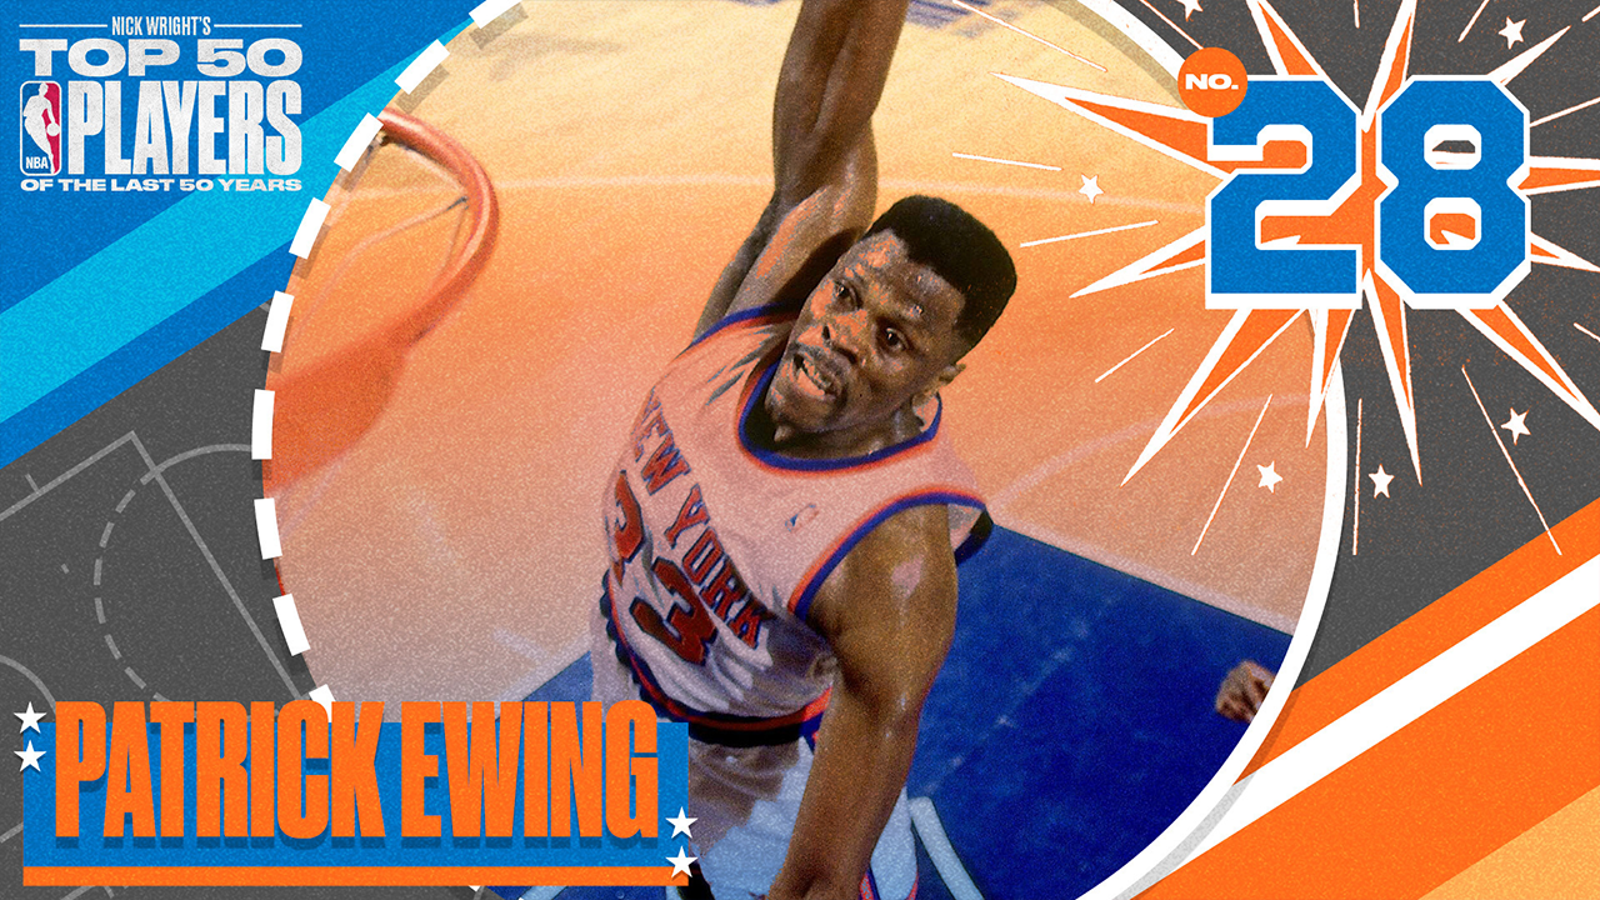 Patrick Ewing: No. 28 on Nick Wright's Top 50 NBA Players of the Last 50 Years